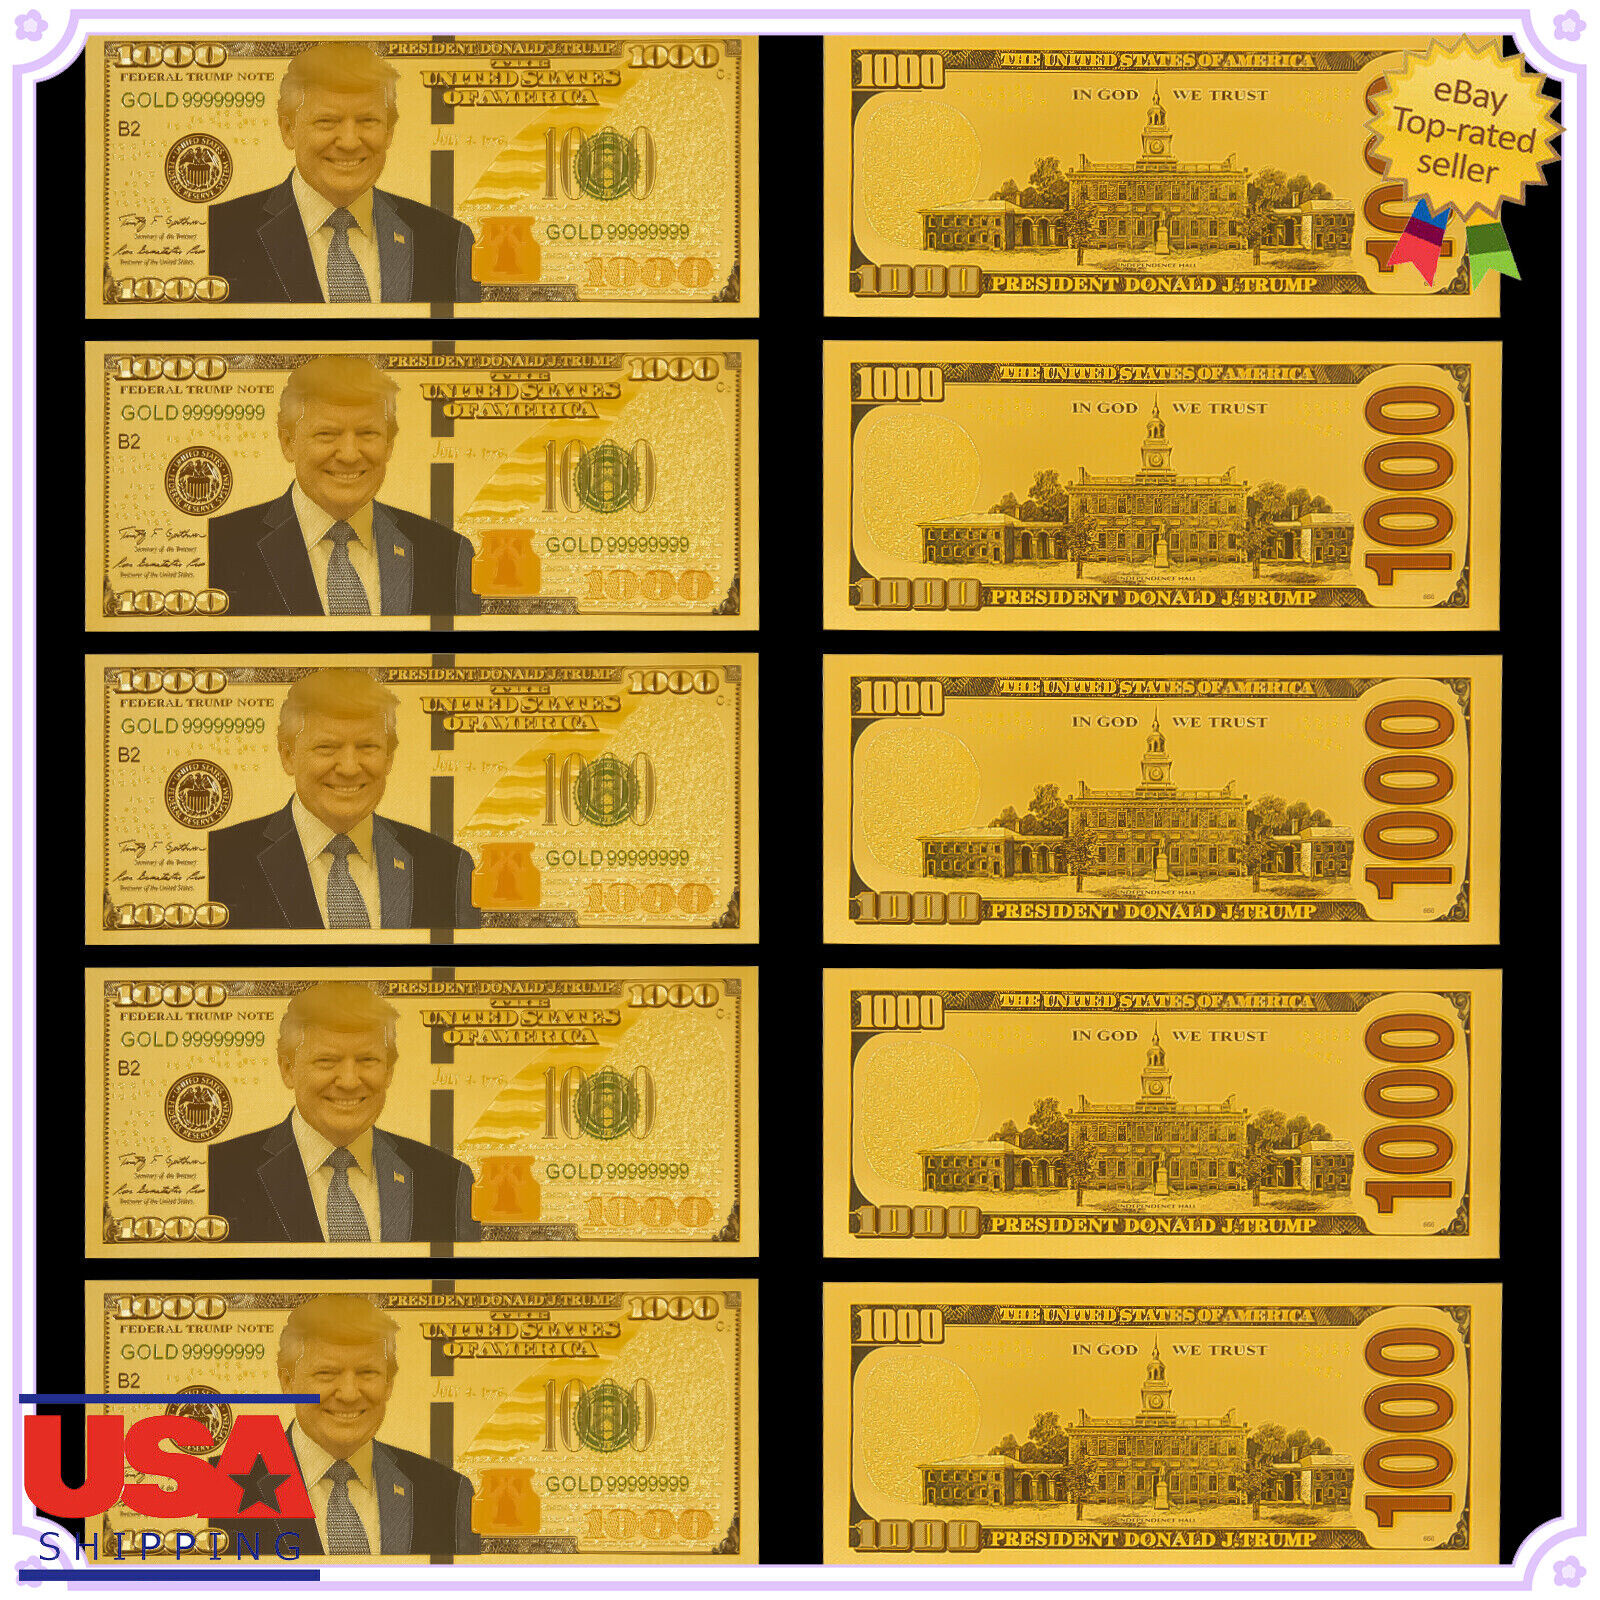 10X President Donald Trump New Colorized $1000 Dollar Bill Gold Foil Banknote